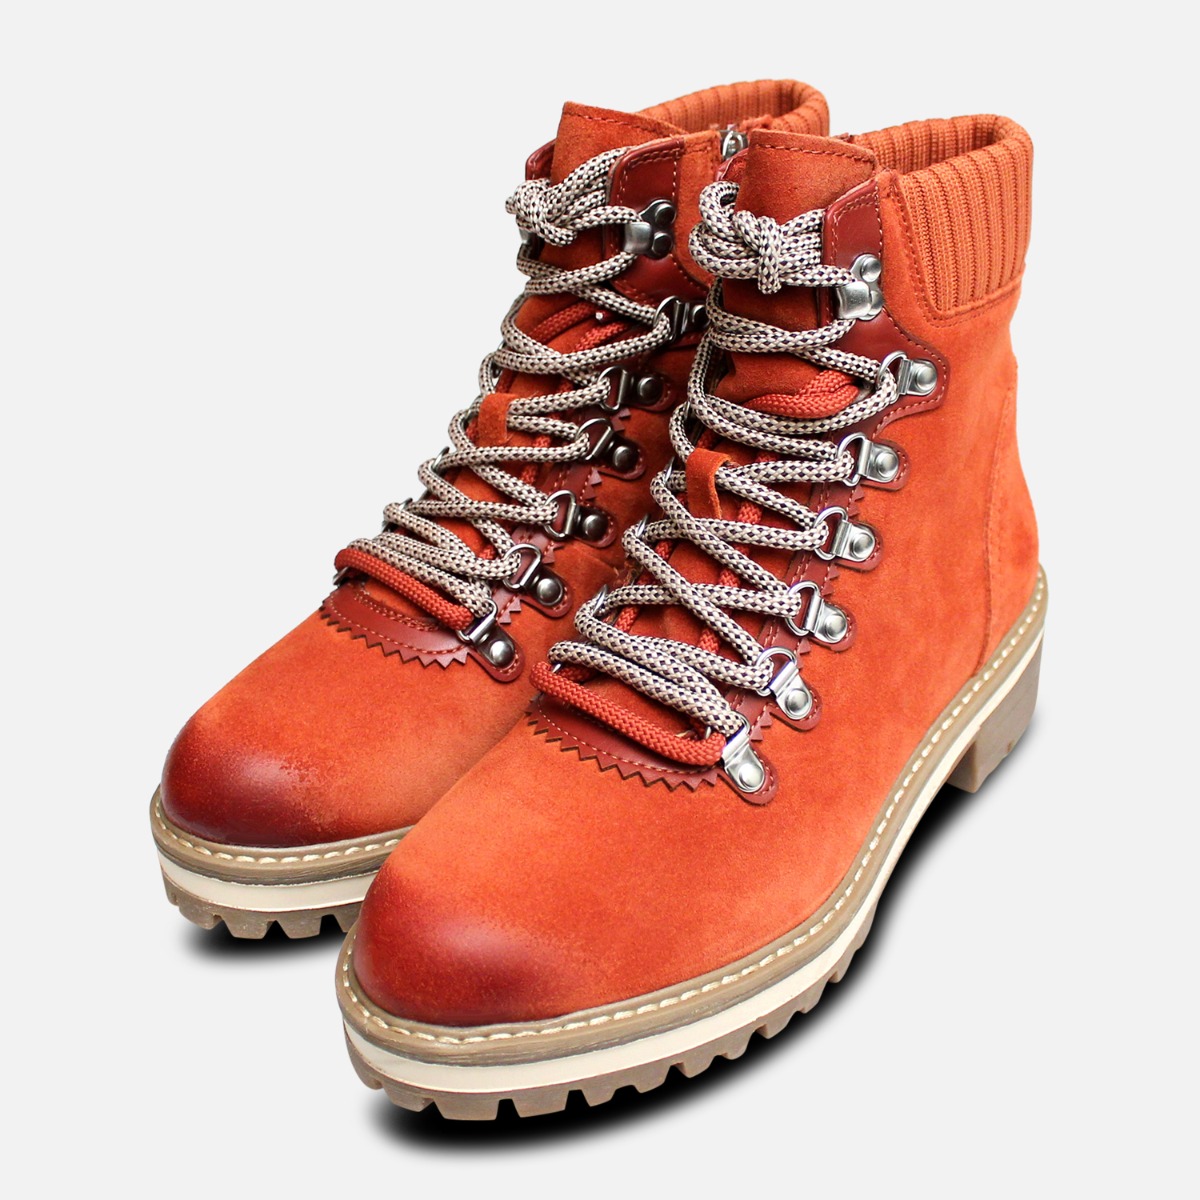 rust suede boots